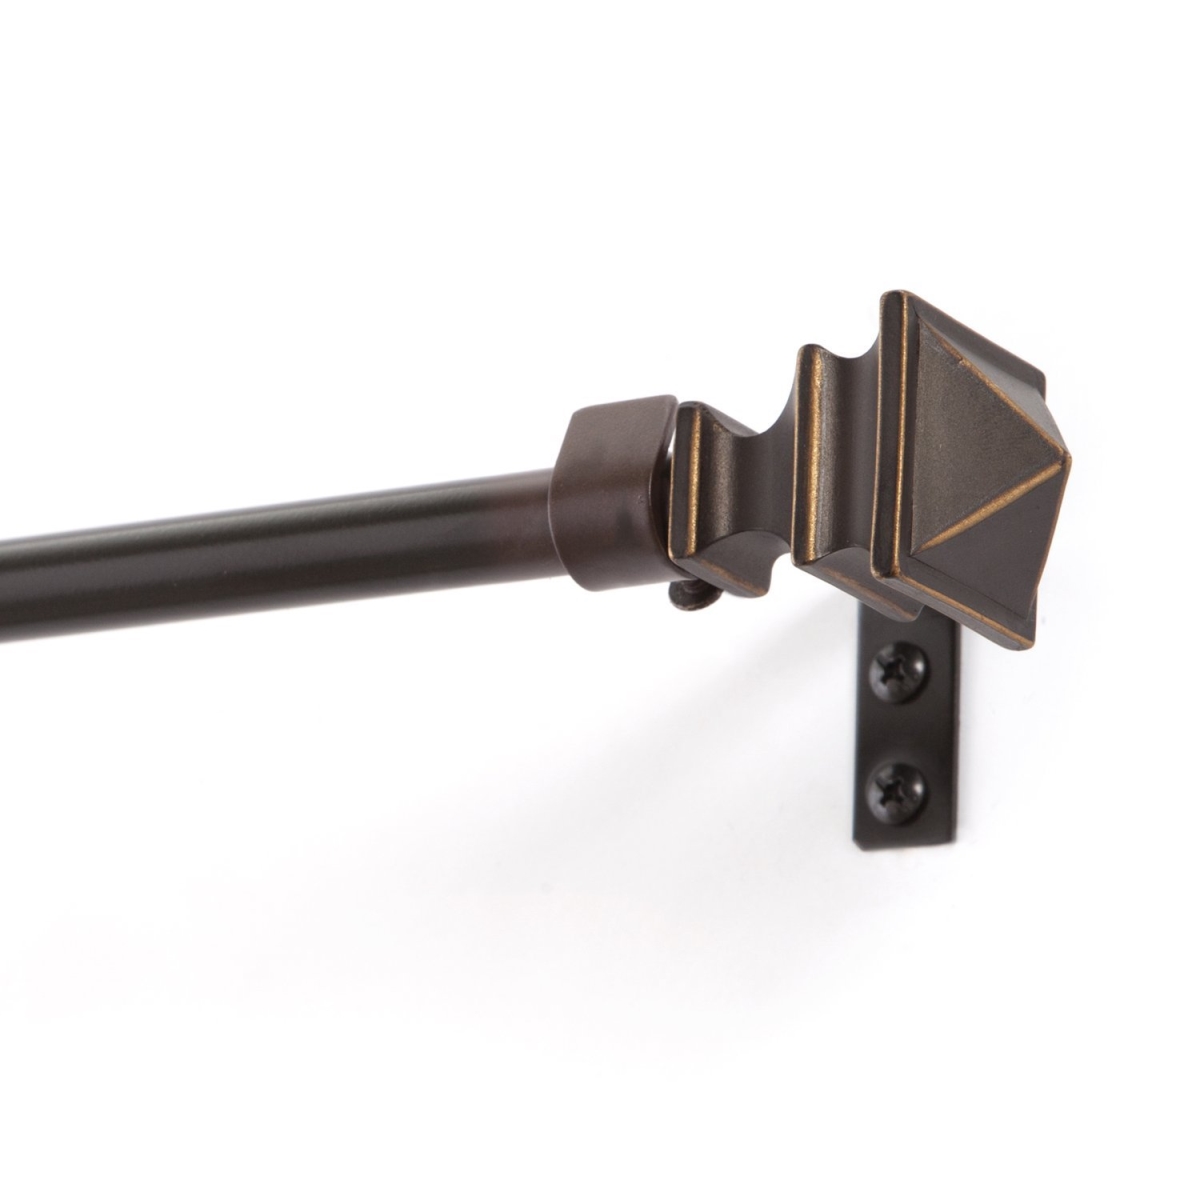 32-lwf1005-1orb 28-48 In. Painted Oil Rubbed Bronze Finish Single Rod Window Hardware With Knob Resin Finial